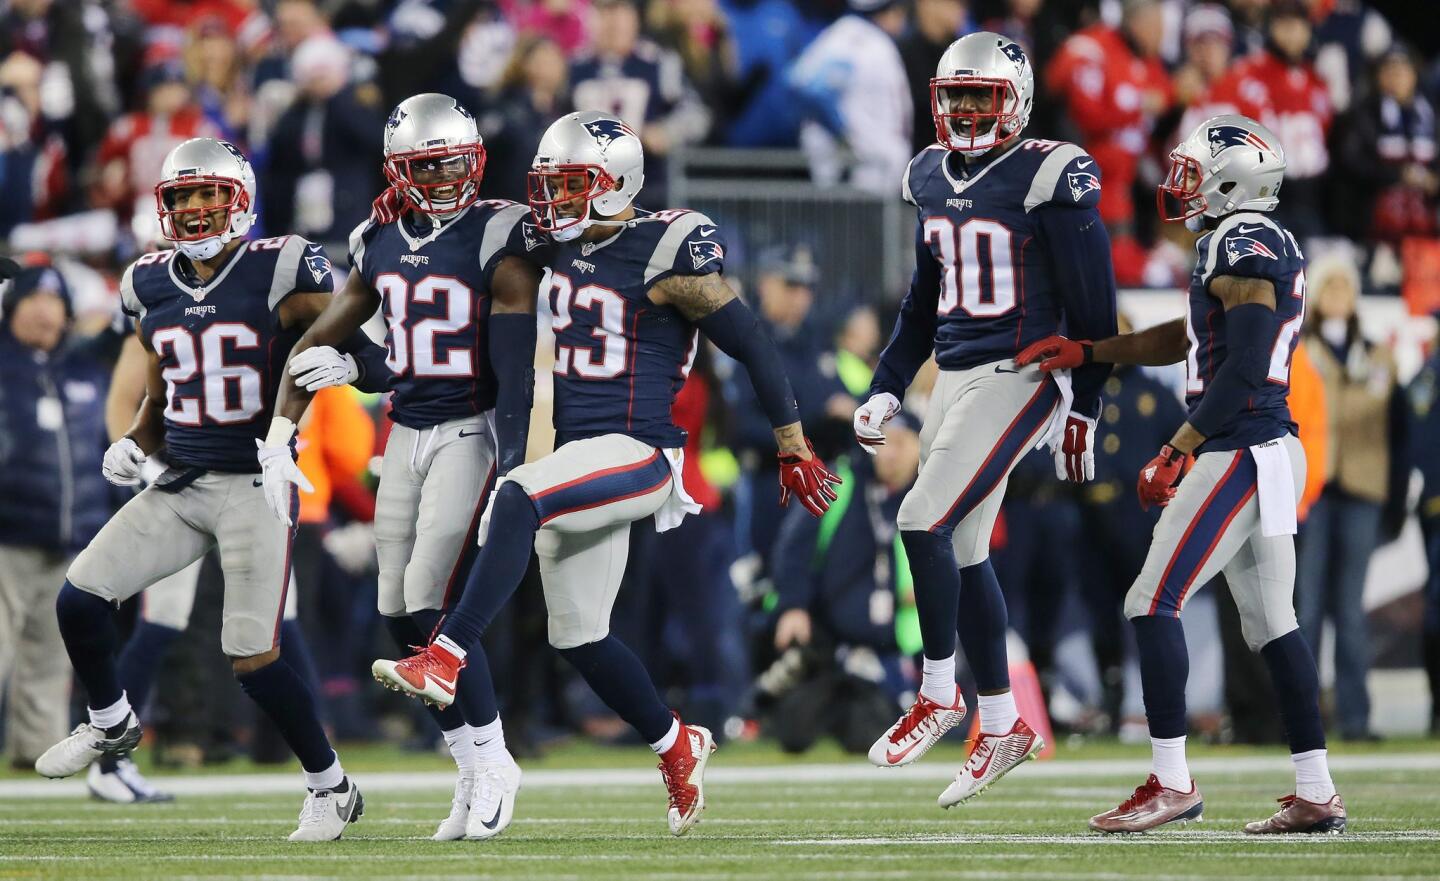 New England Patriots (L-R) Logan Ryan, Devin McCourty, Patrick Chung, Duron Harmon and Malcolm Butler celebrate a defensive stop against the Kansas City Chiefs in the fourth quarter of their AFC Divisional Round Playoff at Gillette Stadium in Foxborough, Massachusetts, USA, 16 January 2016. The Patriots defeated the Chiefs and will go on to face either the Denver Broncos or the Pittsburgh Steelers in the AFC Championship game.